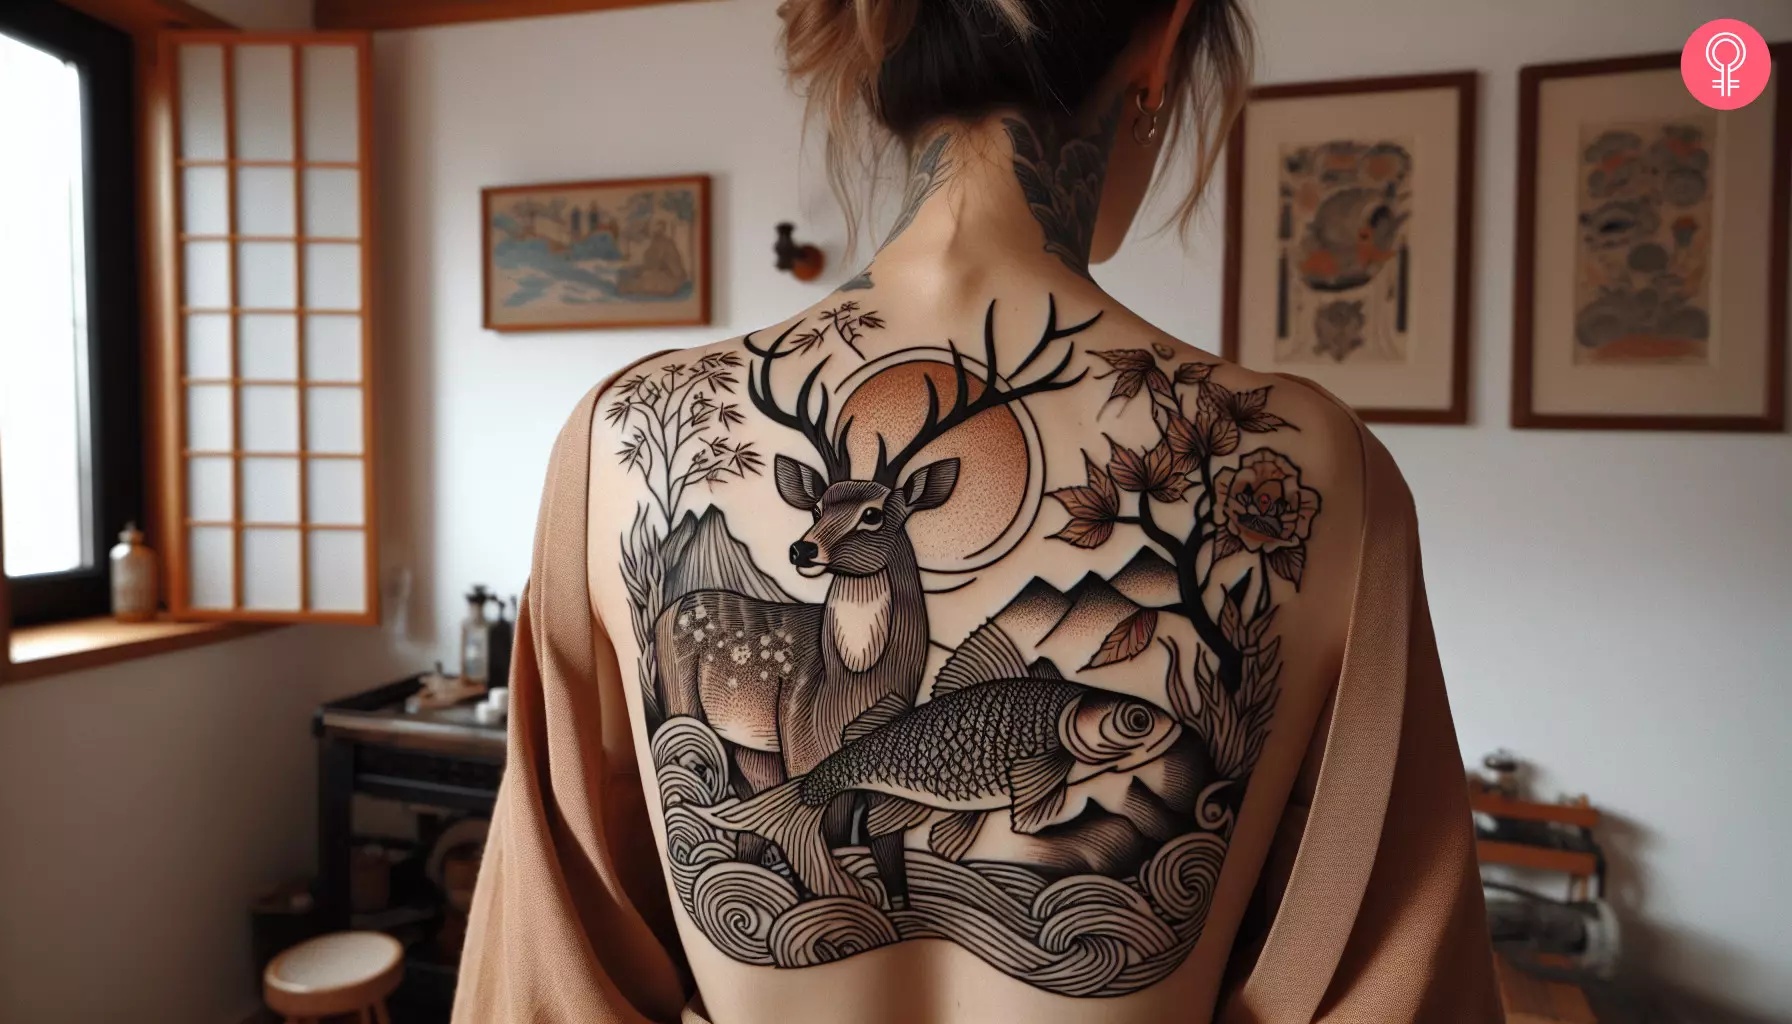 A deer and fish tattoo on the back